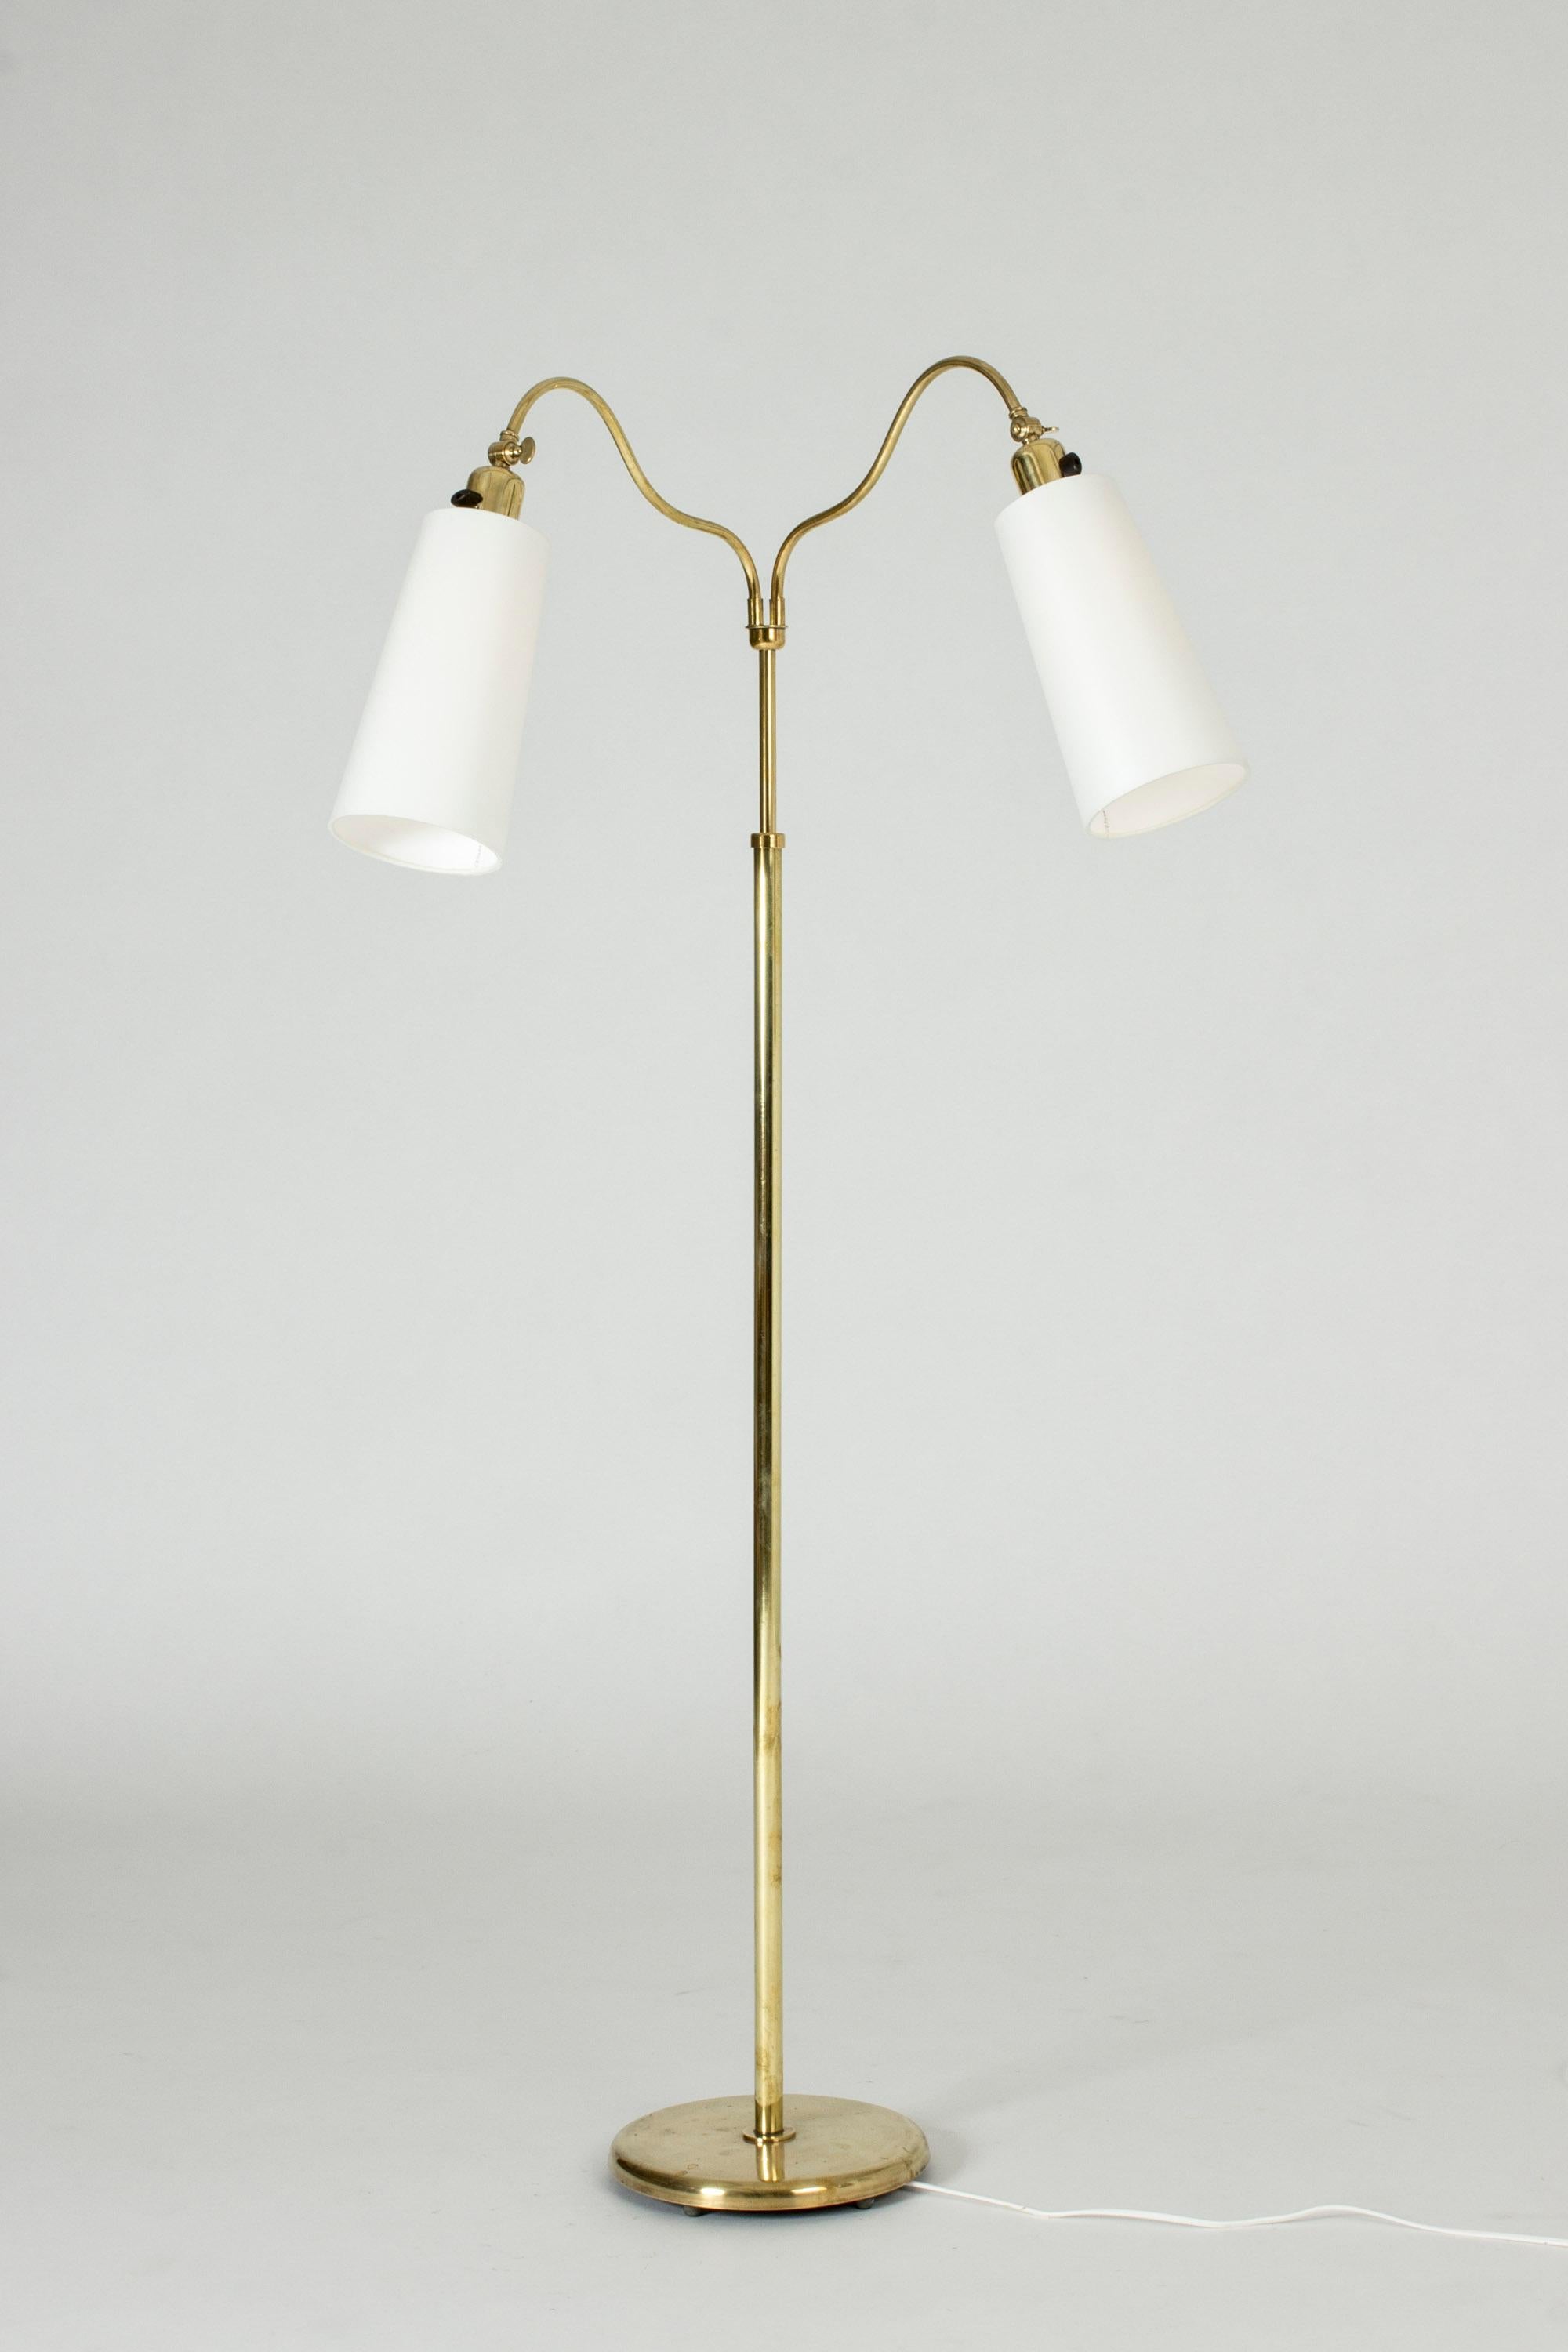 Swedish modern floor lamp, made from brass. Slender, elegant design with billowing necks that extend to the cylinder shaped shades. The height is adjustable and the necks can be swung around. The angles of the shades are adjustable.